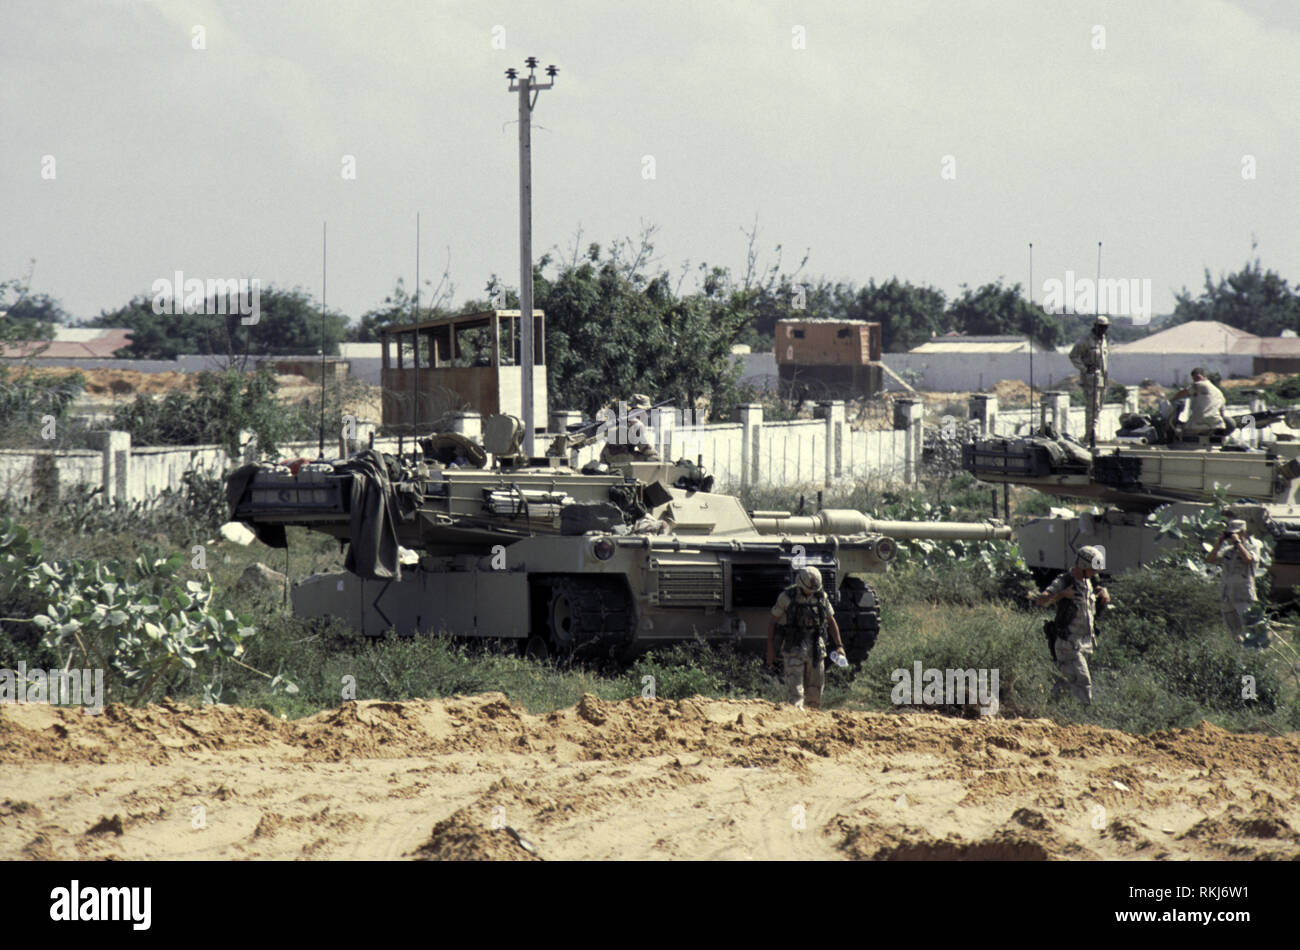 16th October 1993 U.S. Army M1A1 Abrams tanks of the 24th Infantry Division, 1st Battalion of the 64th Armored Regiment at UNOSOM Headquarters in Mogadishu, Somalia. Stock Photo